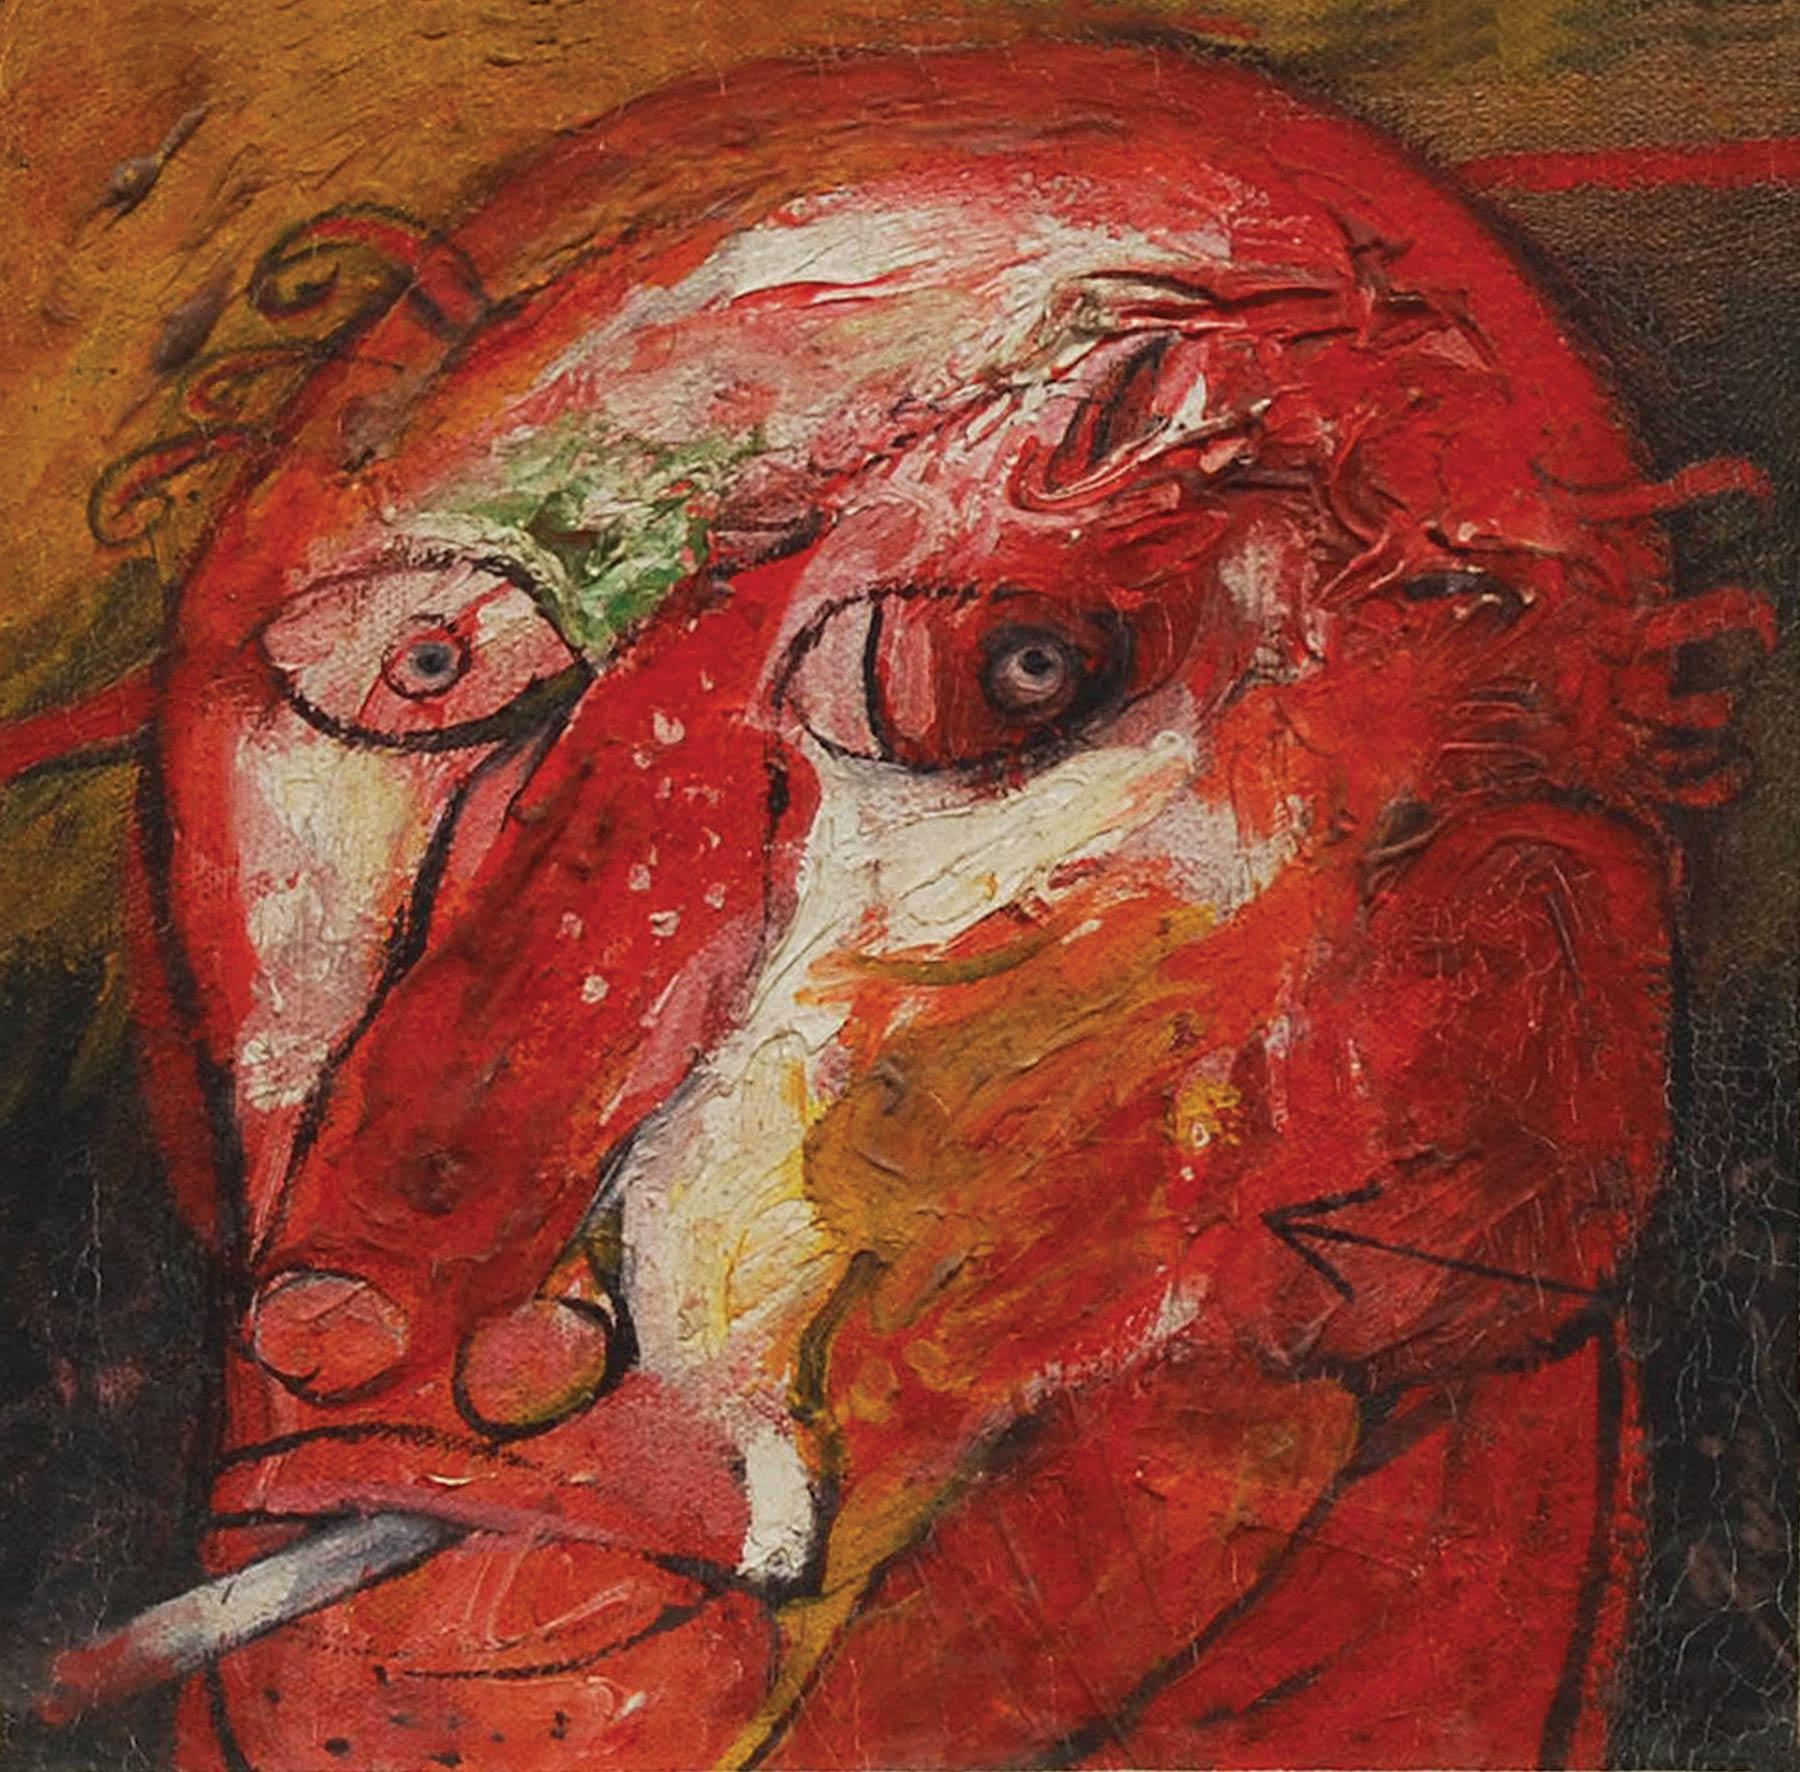 Sunil Das - Head Series - 7.25 x 7.25 inches (unframed size)
Mixed Media on Board (Set of 2)
Inclusive of shipment in ready to hang form.

Sunil Das (1939-2015) was a Master Modern Indian Artist from Bengal. Extremely successful right from his